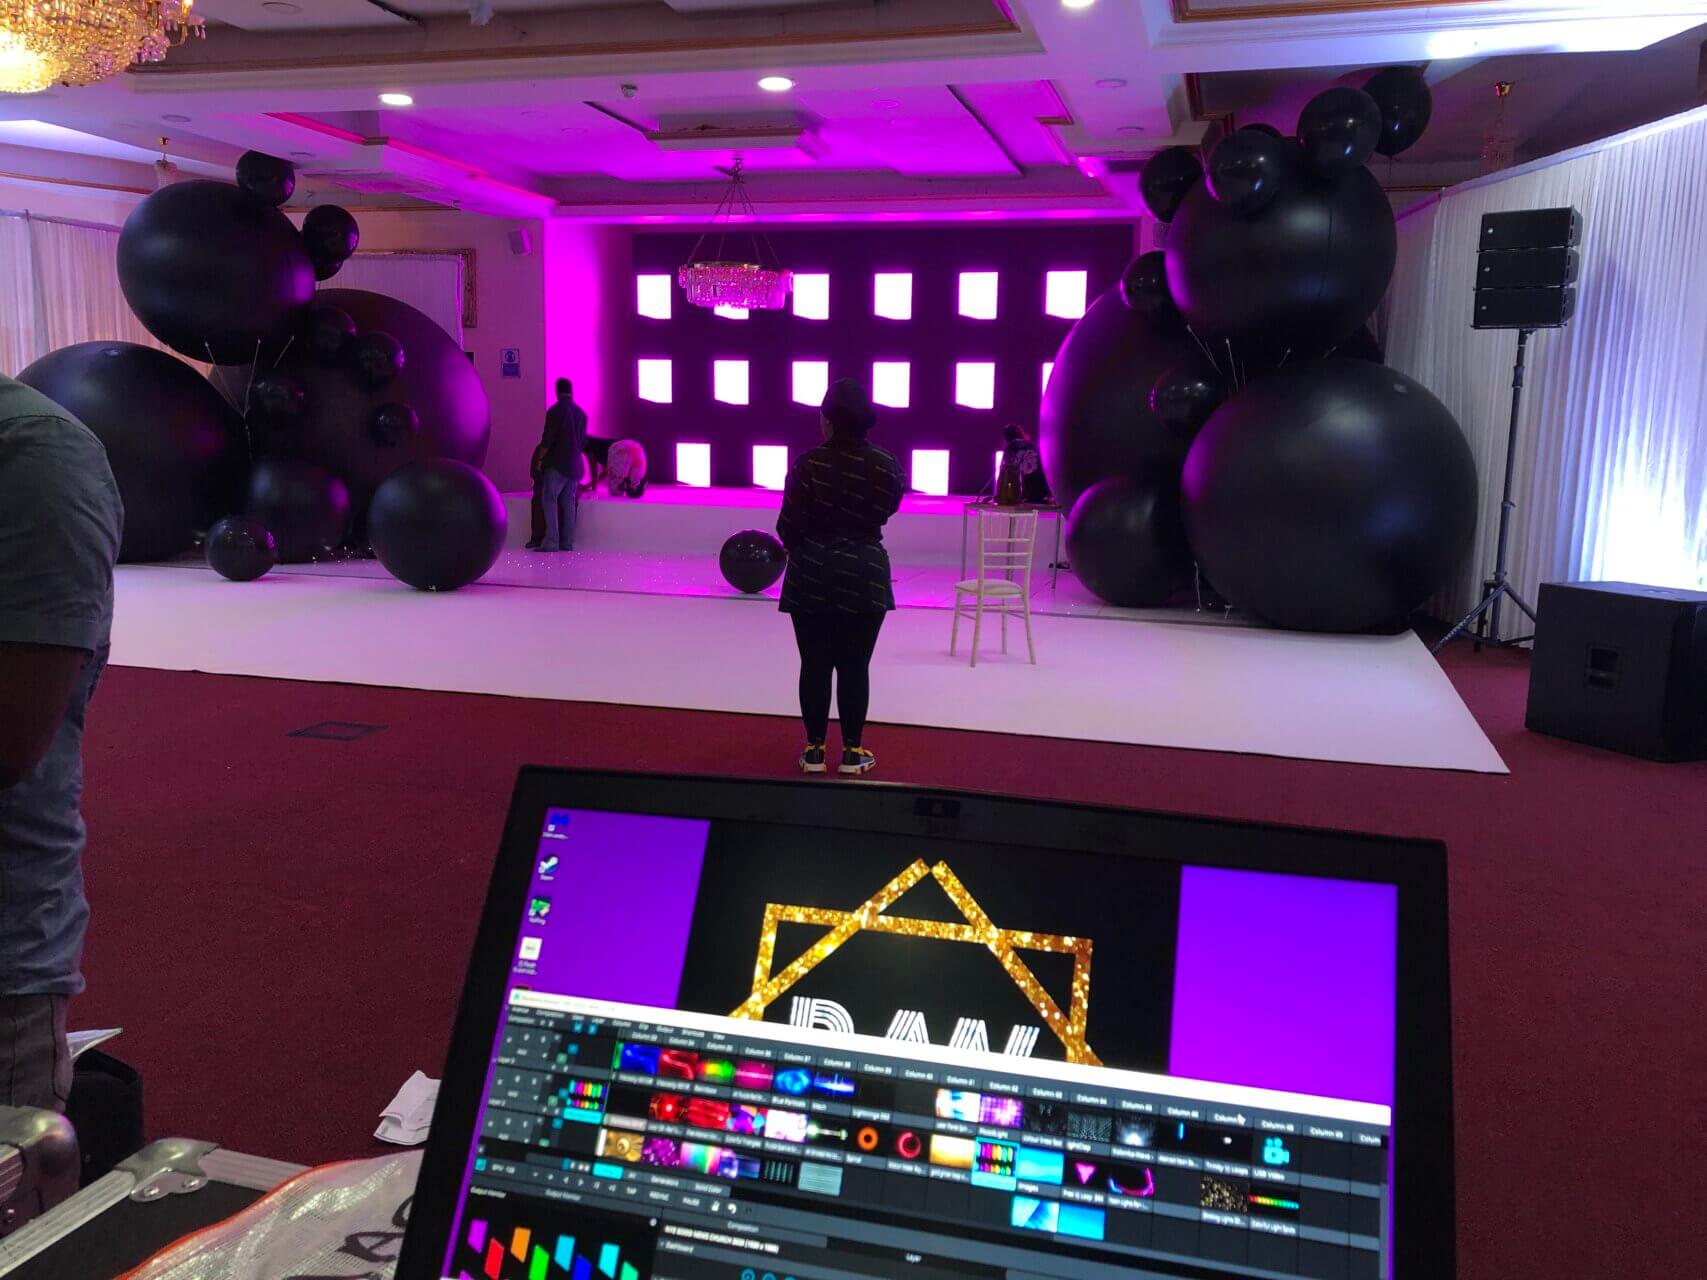 Your New Brand Launch with LED Screen Hire in London Event Production with LED Screen